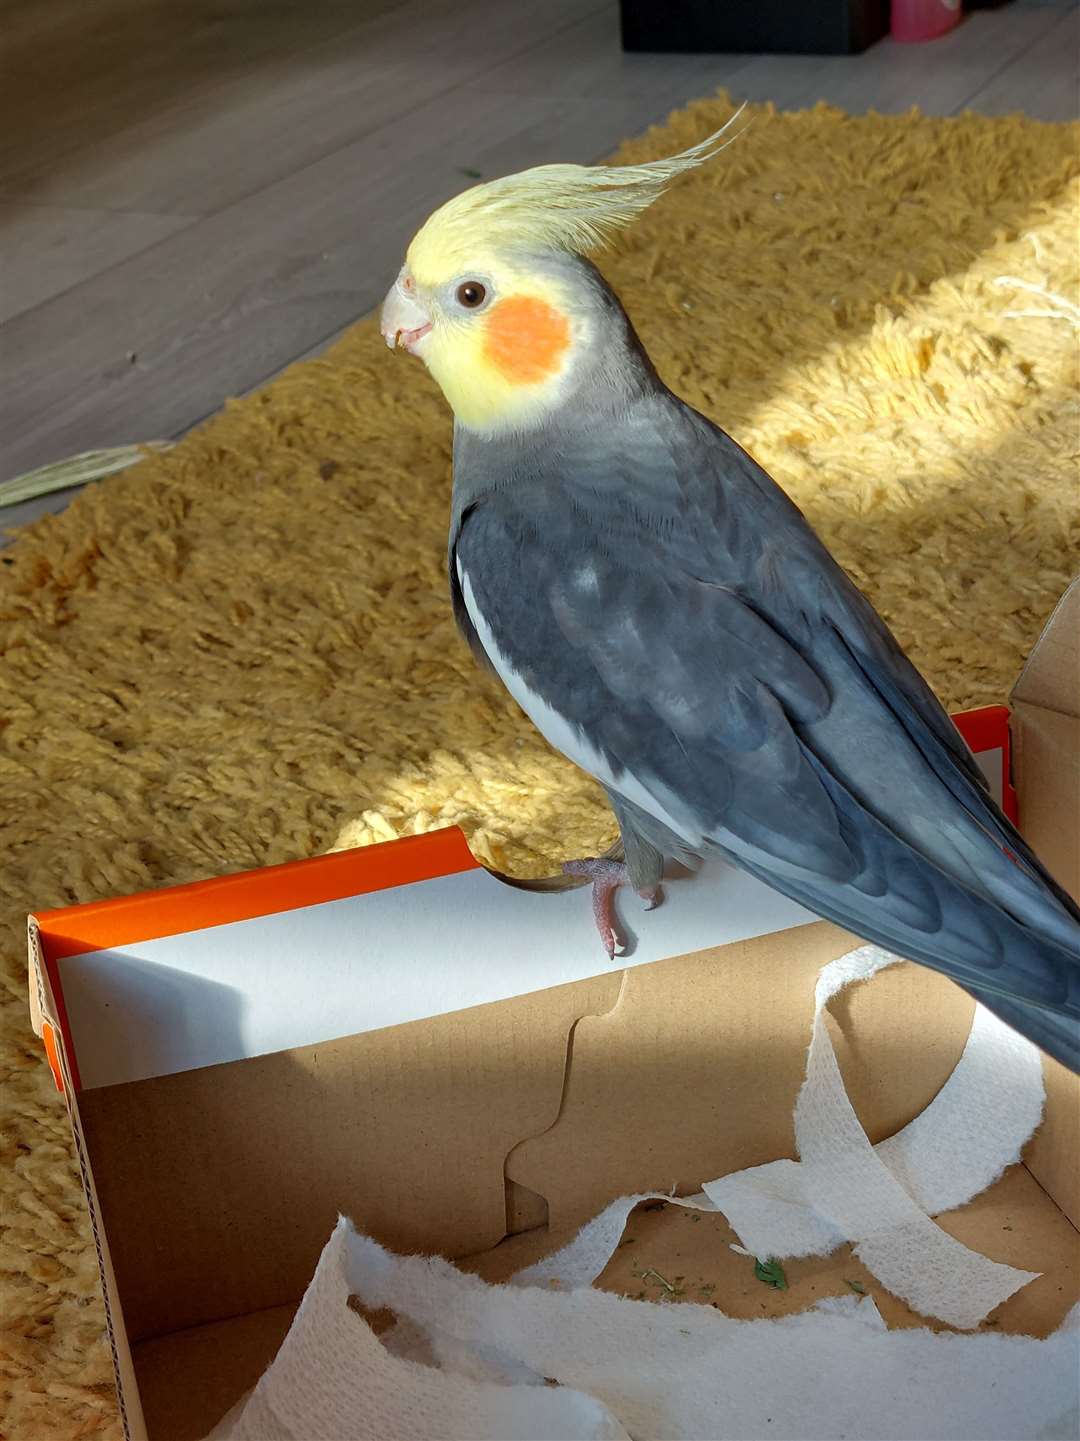 Have you seen Milo the cockatiel missing from his home in Sittingbourne?